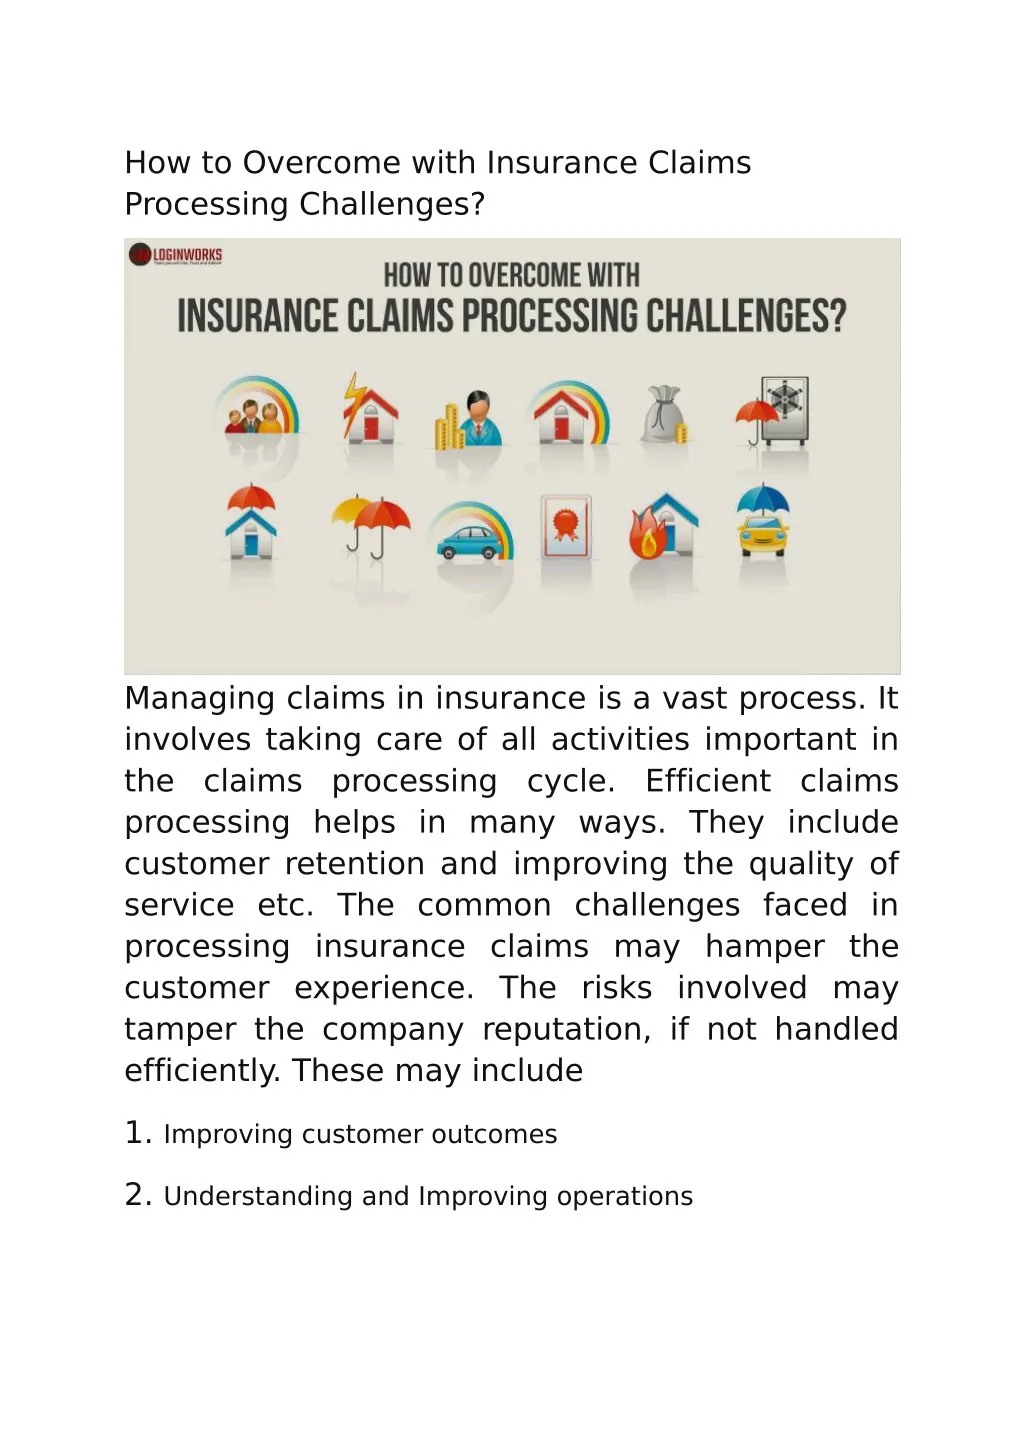 how to overcome with insurance claims processing